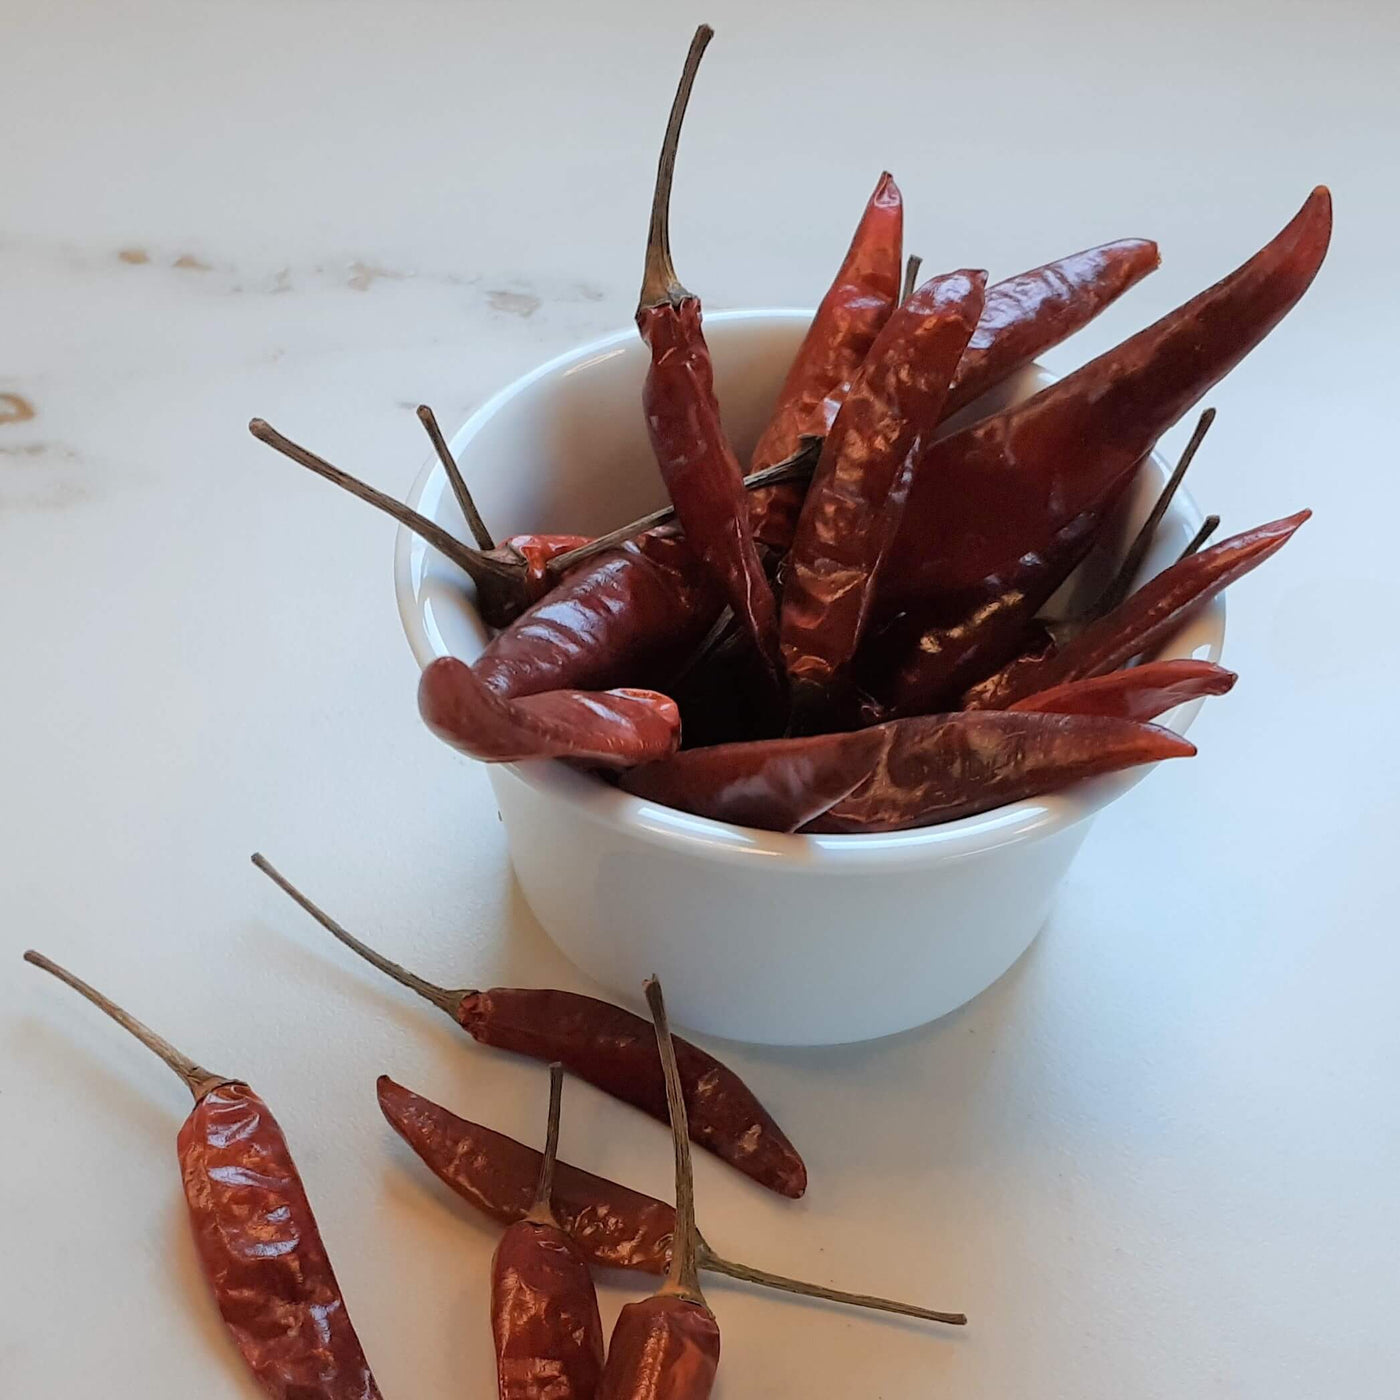 Chili from Myanmar